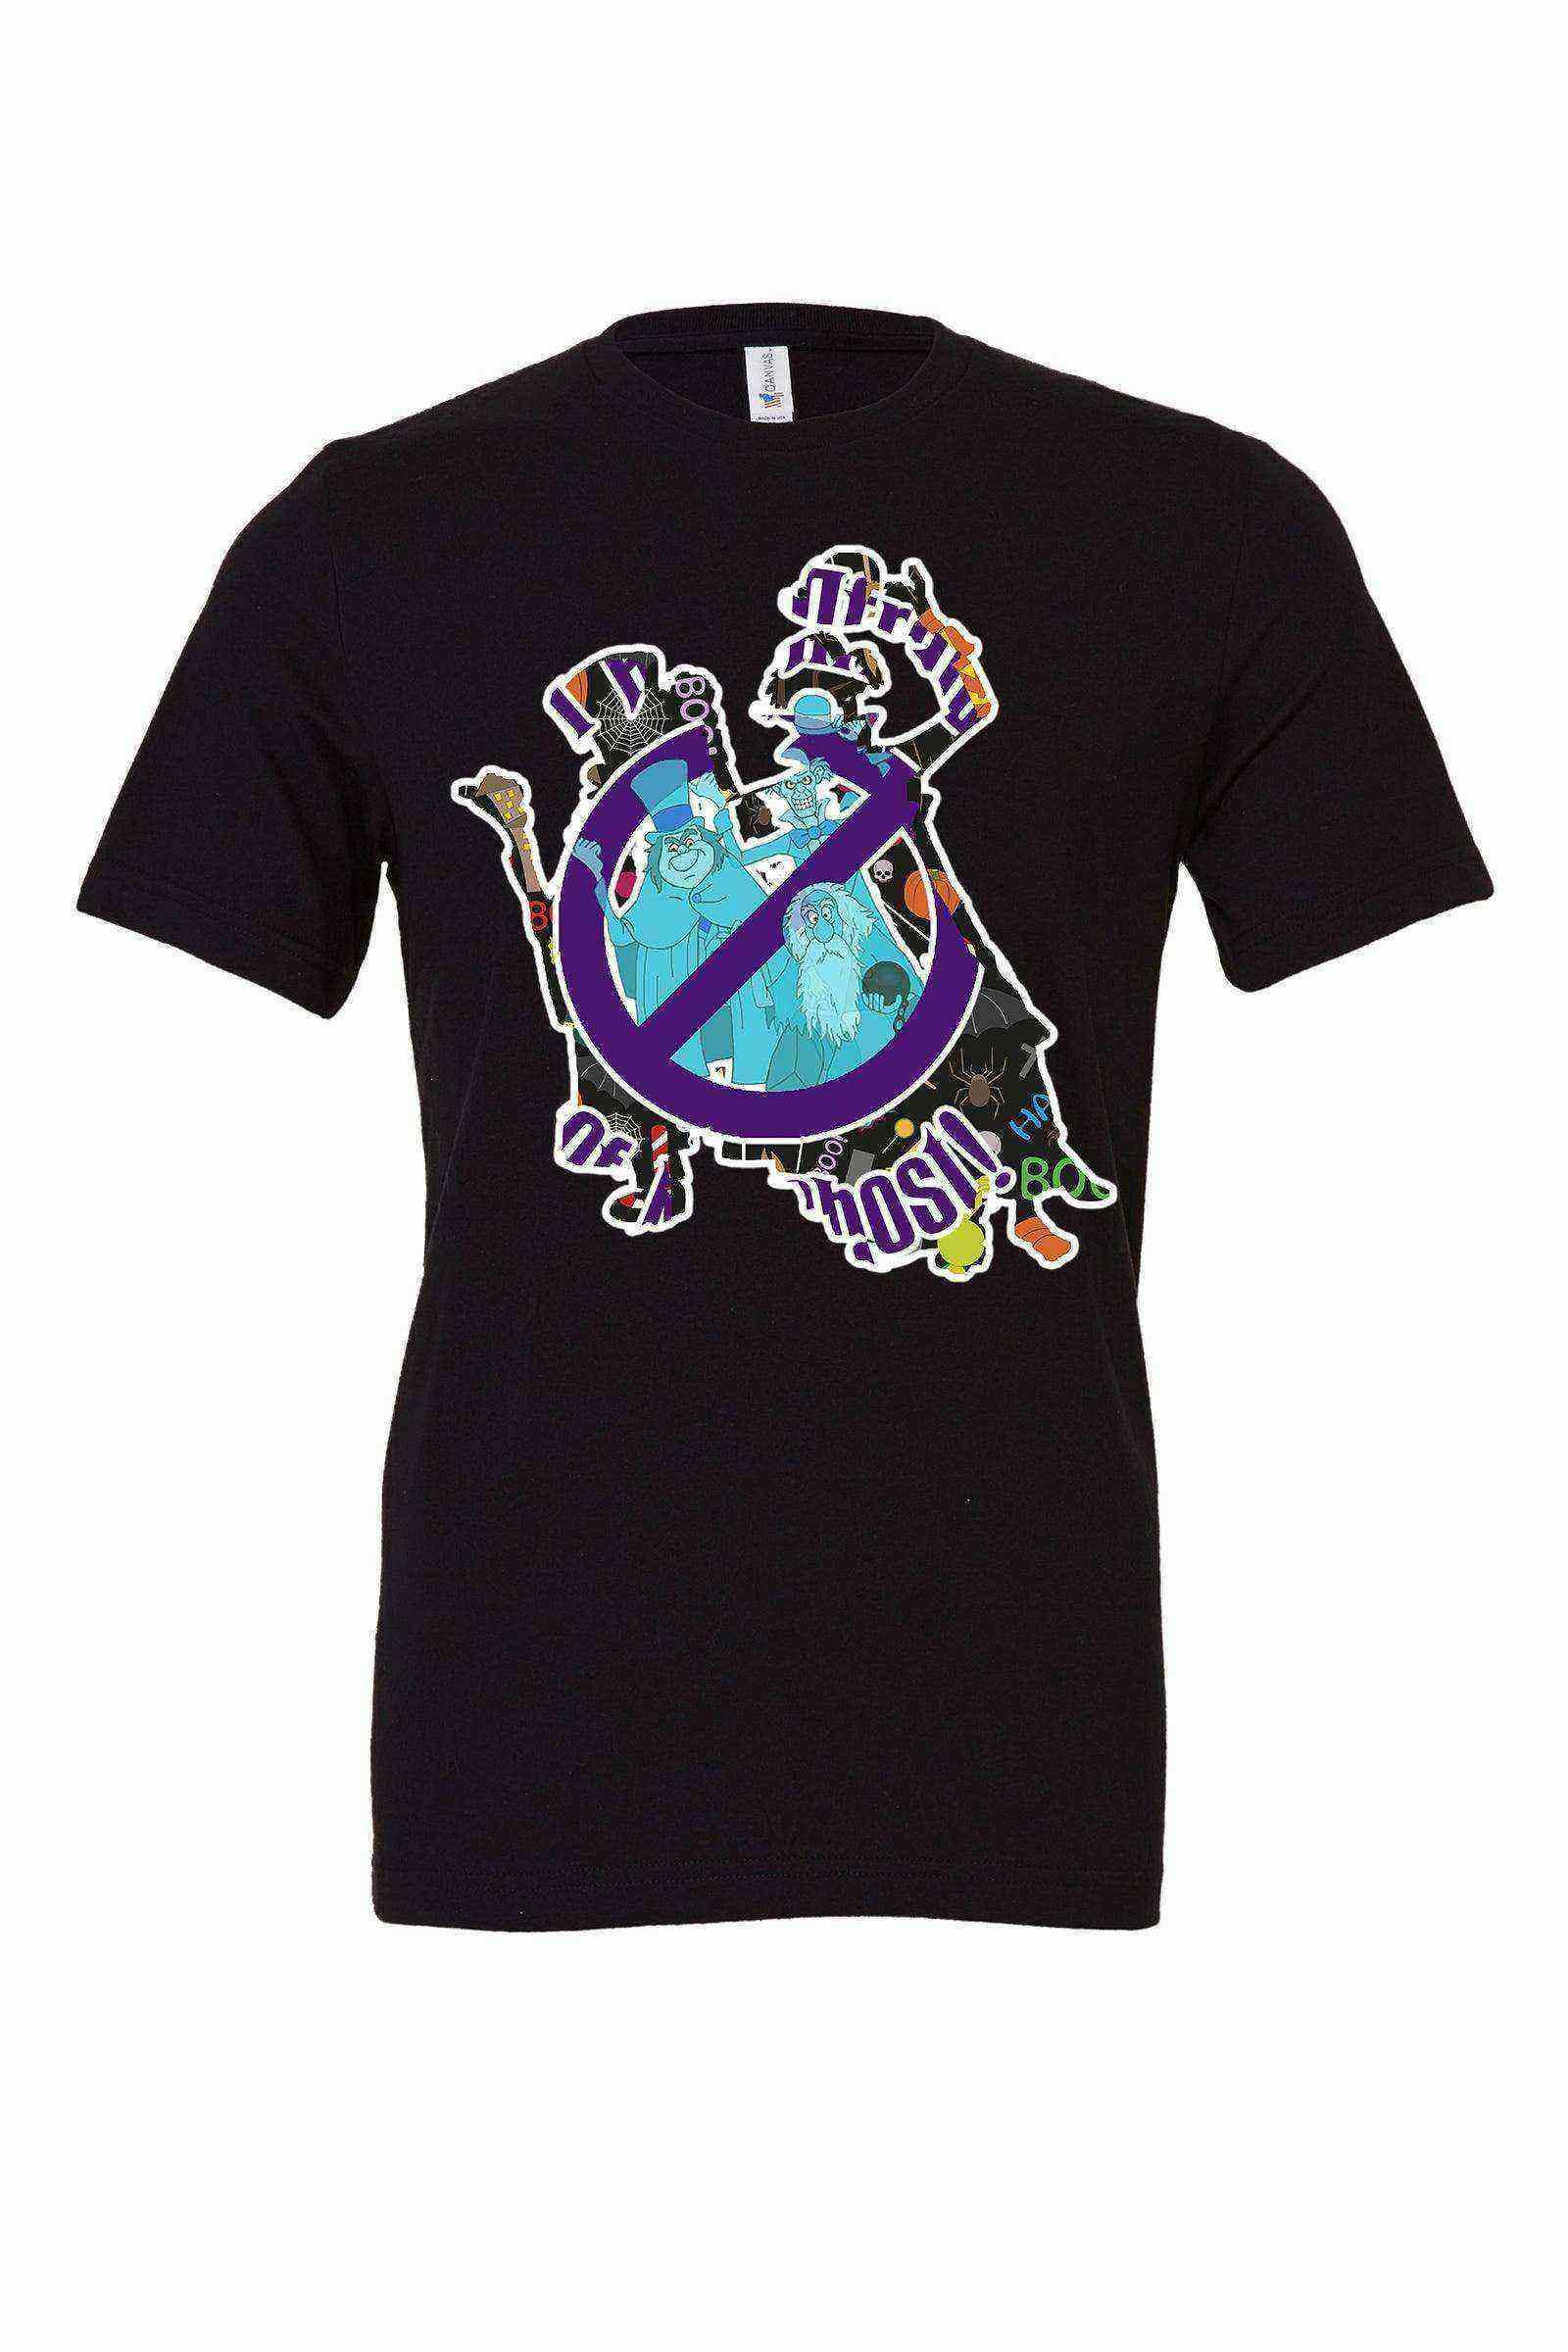 Toddler | Graffiti Haunted Mansion Ghostbusters Tee - Dylan's Tees